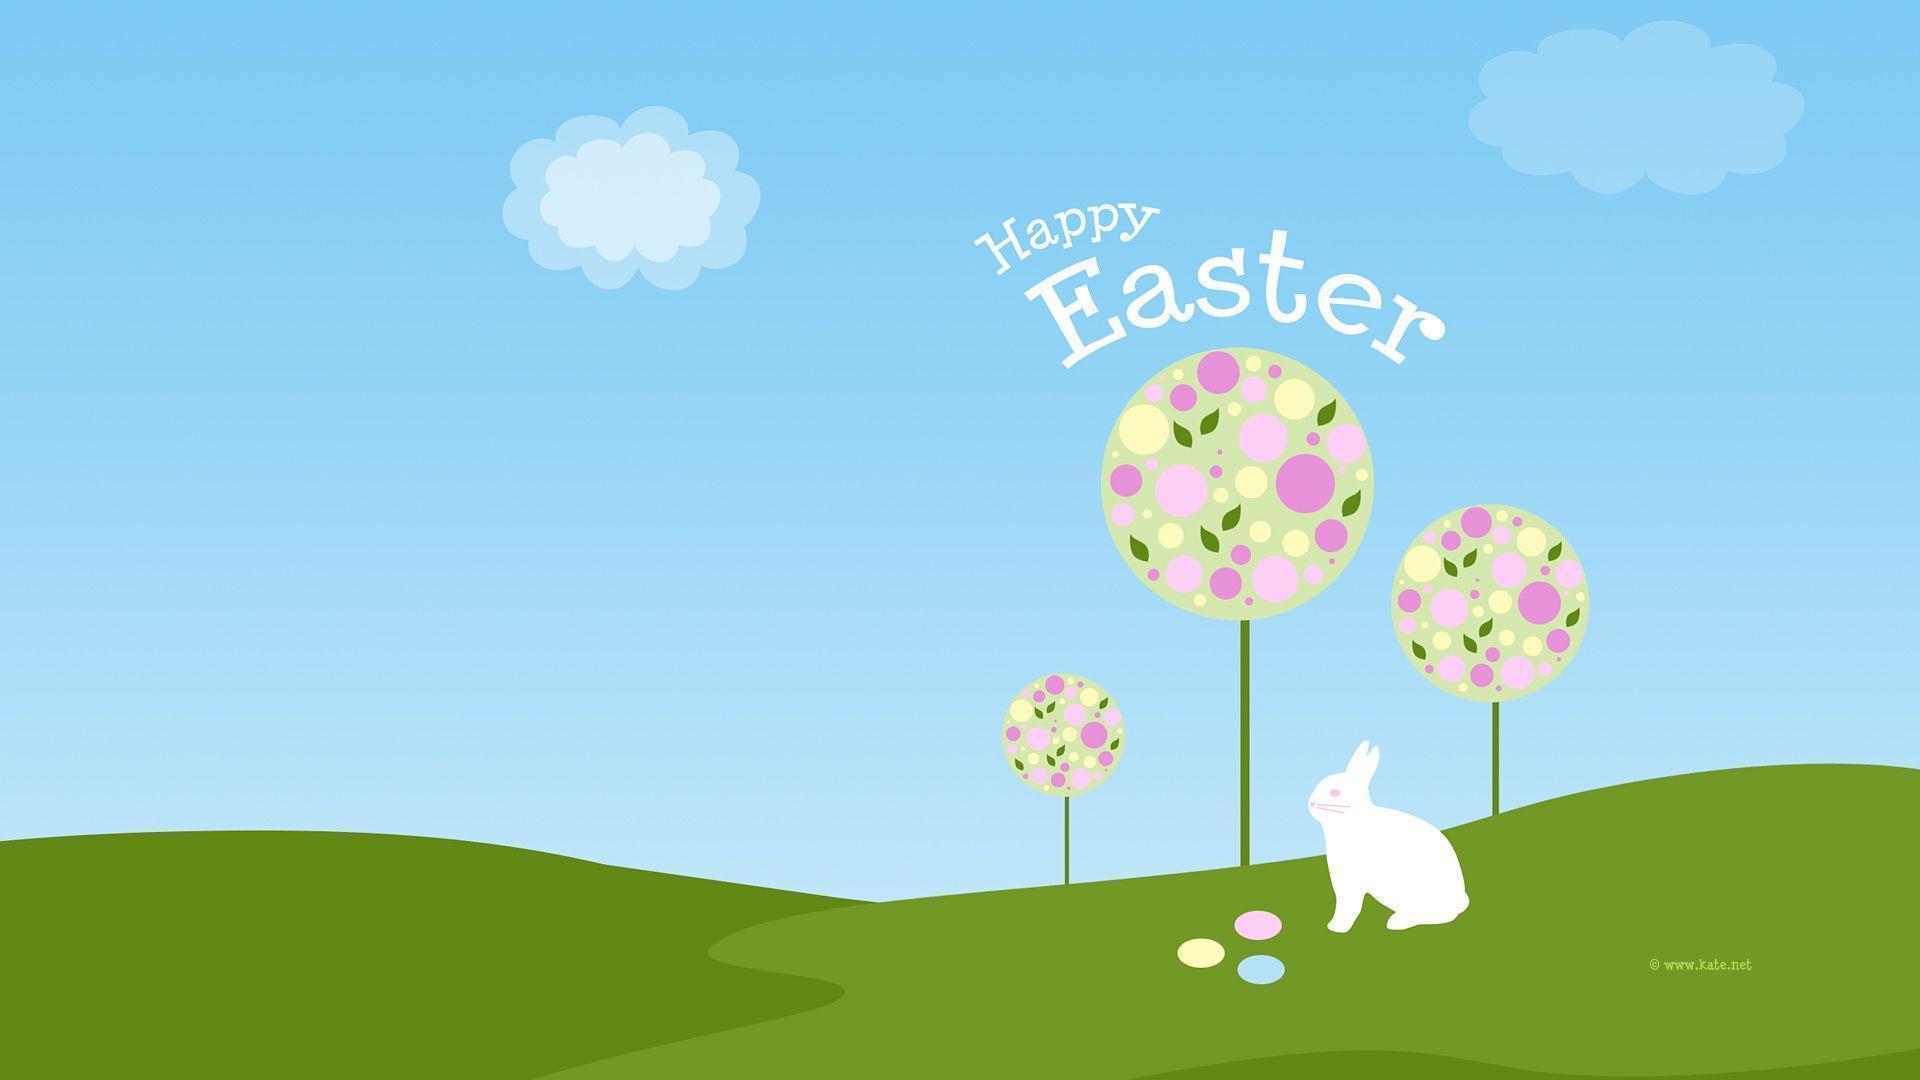 Easter Facebook Covers wallpaper